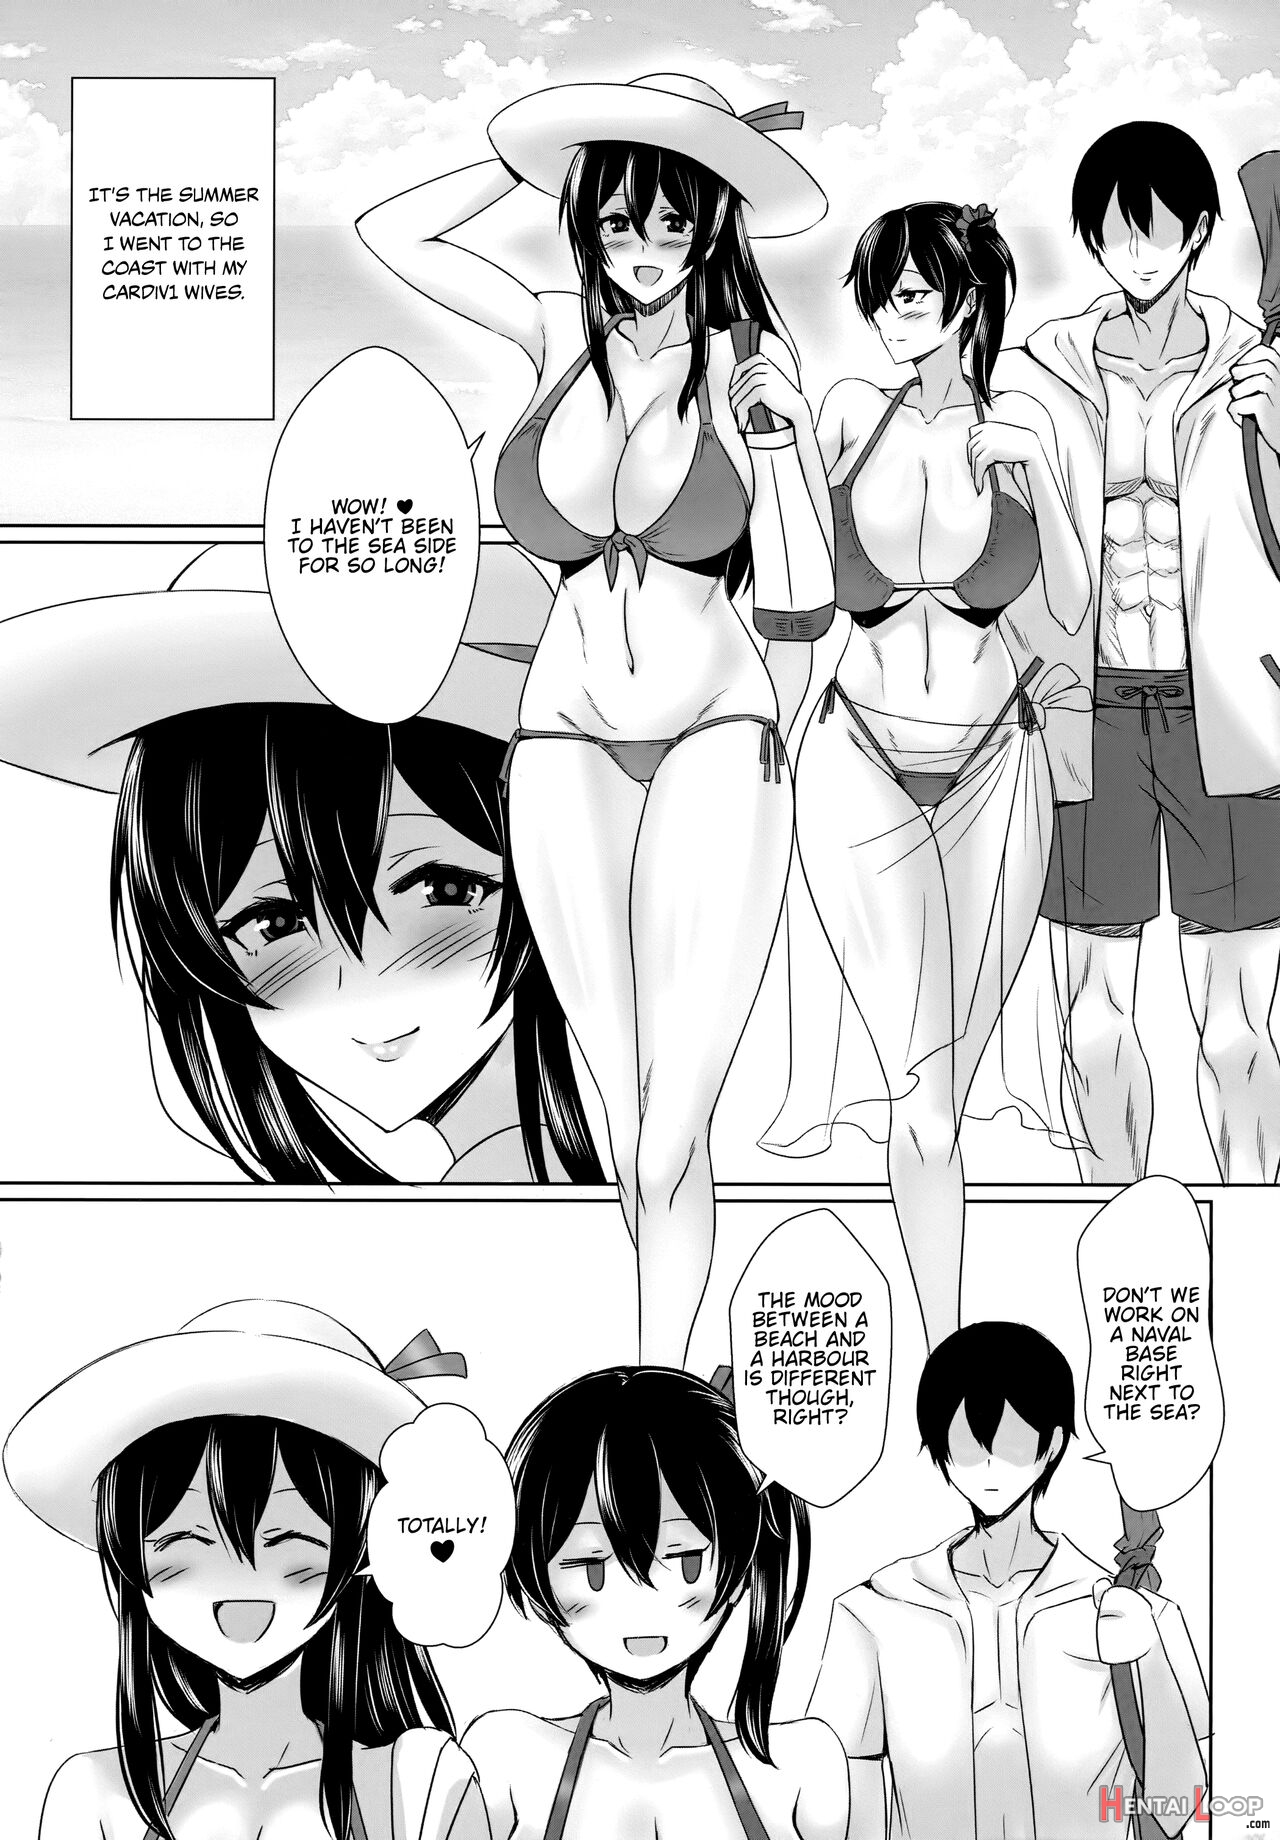 Summer With Fleet Carrier Wives page 2